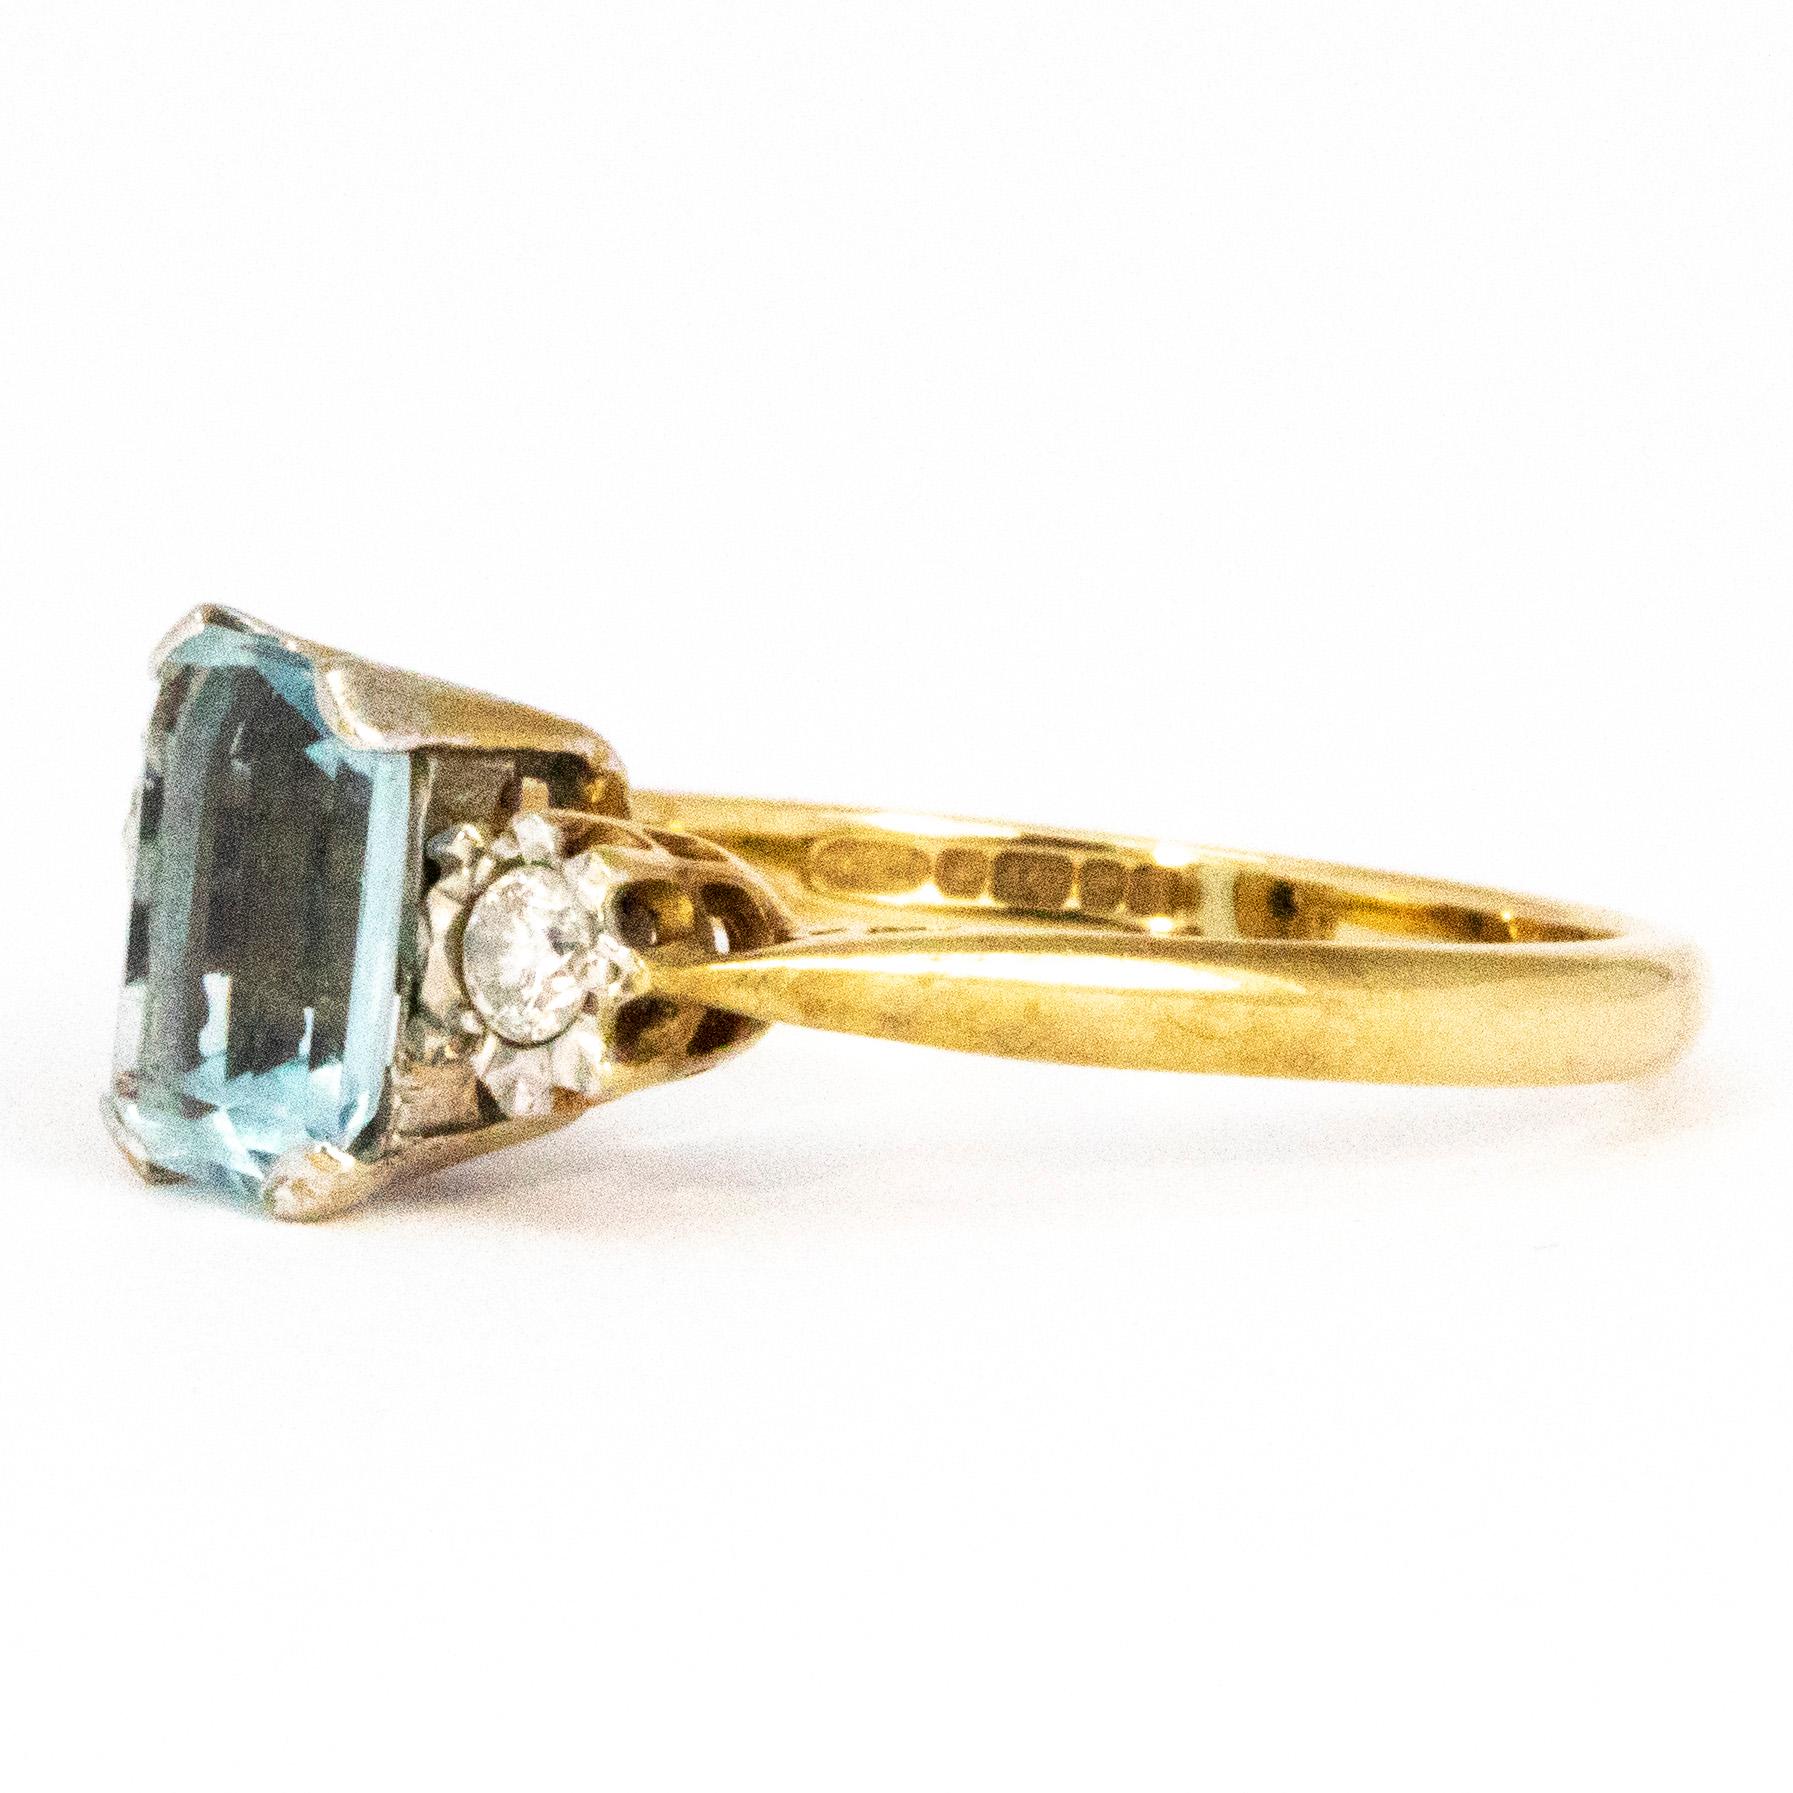 The centre stone on this gorgeous ring is an emerald cut aqua stone measuring 1carat. Either side of this pale blue stone are two round cut diamonds measuring 10pts each. The contrasting shapes of the stones make this ring very stylish. Modelled in